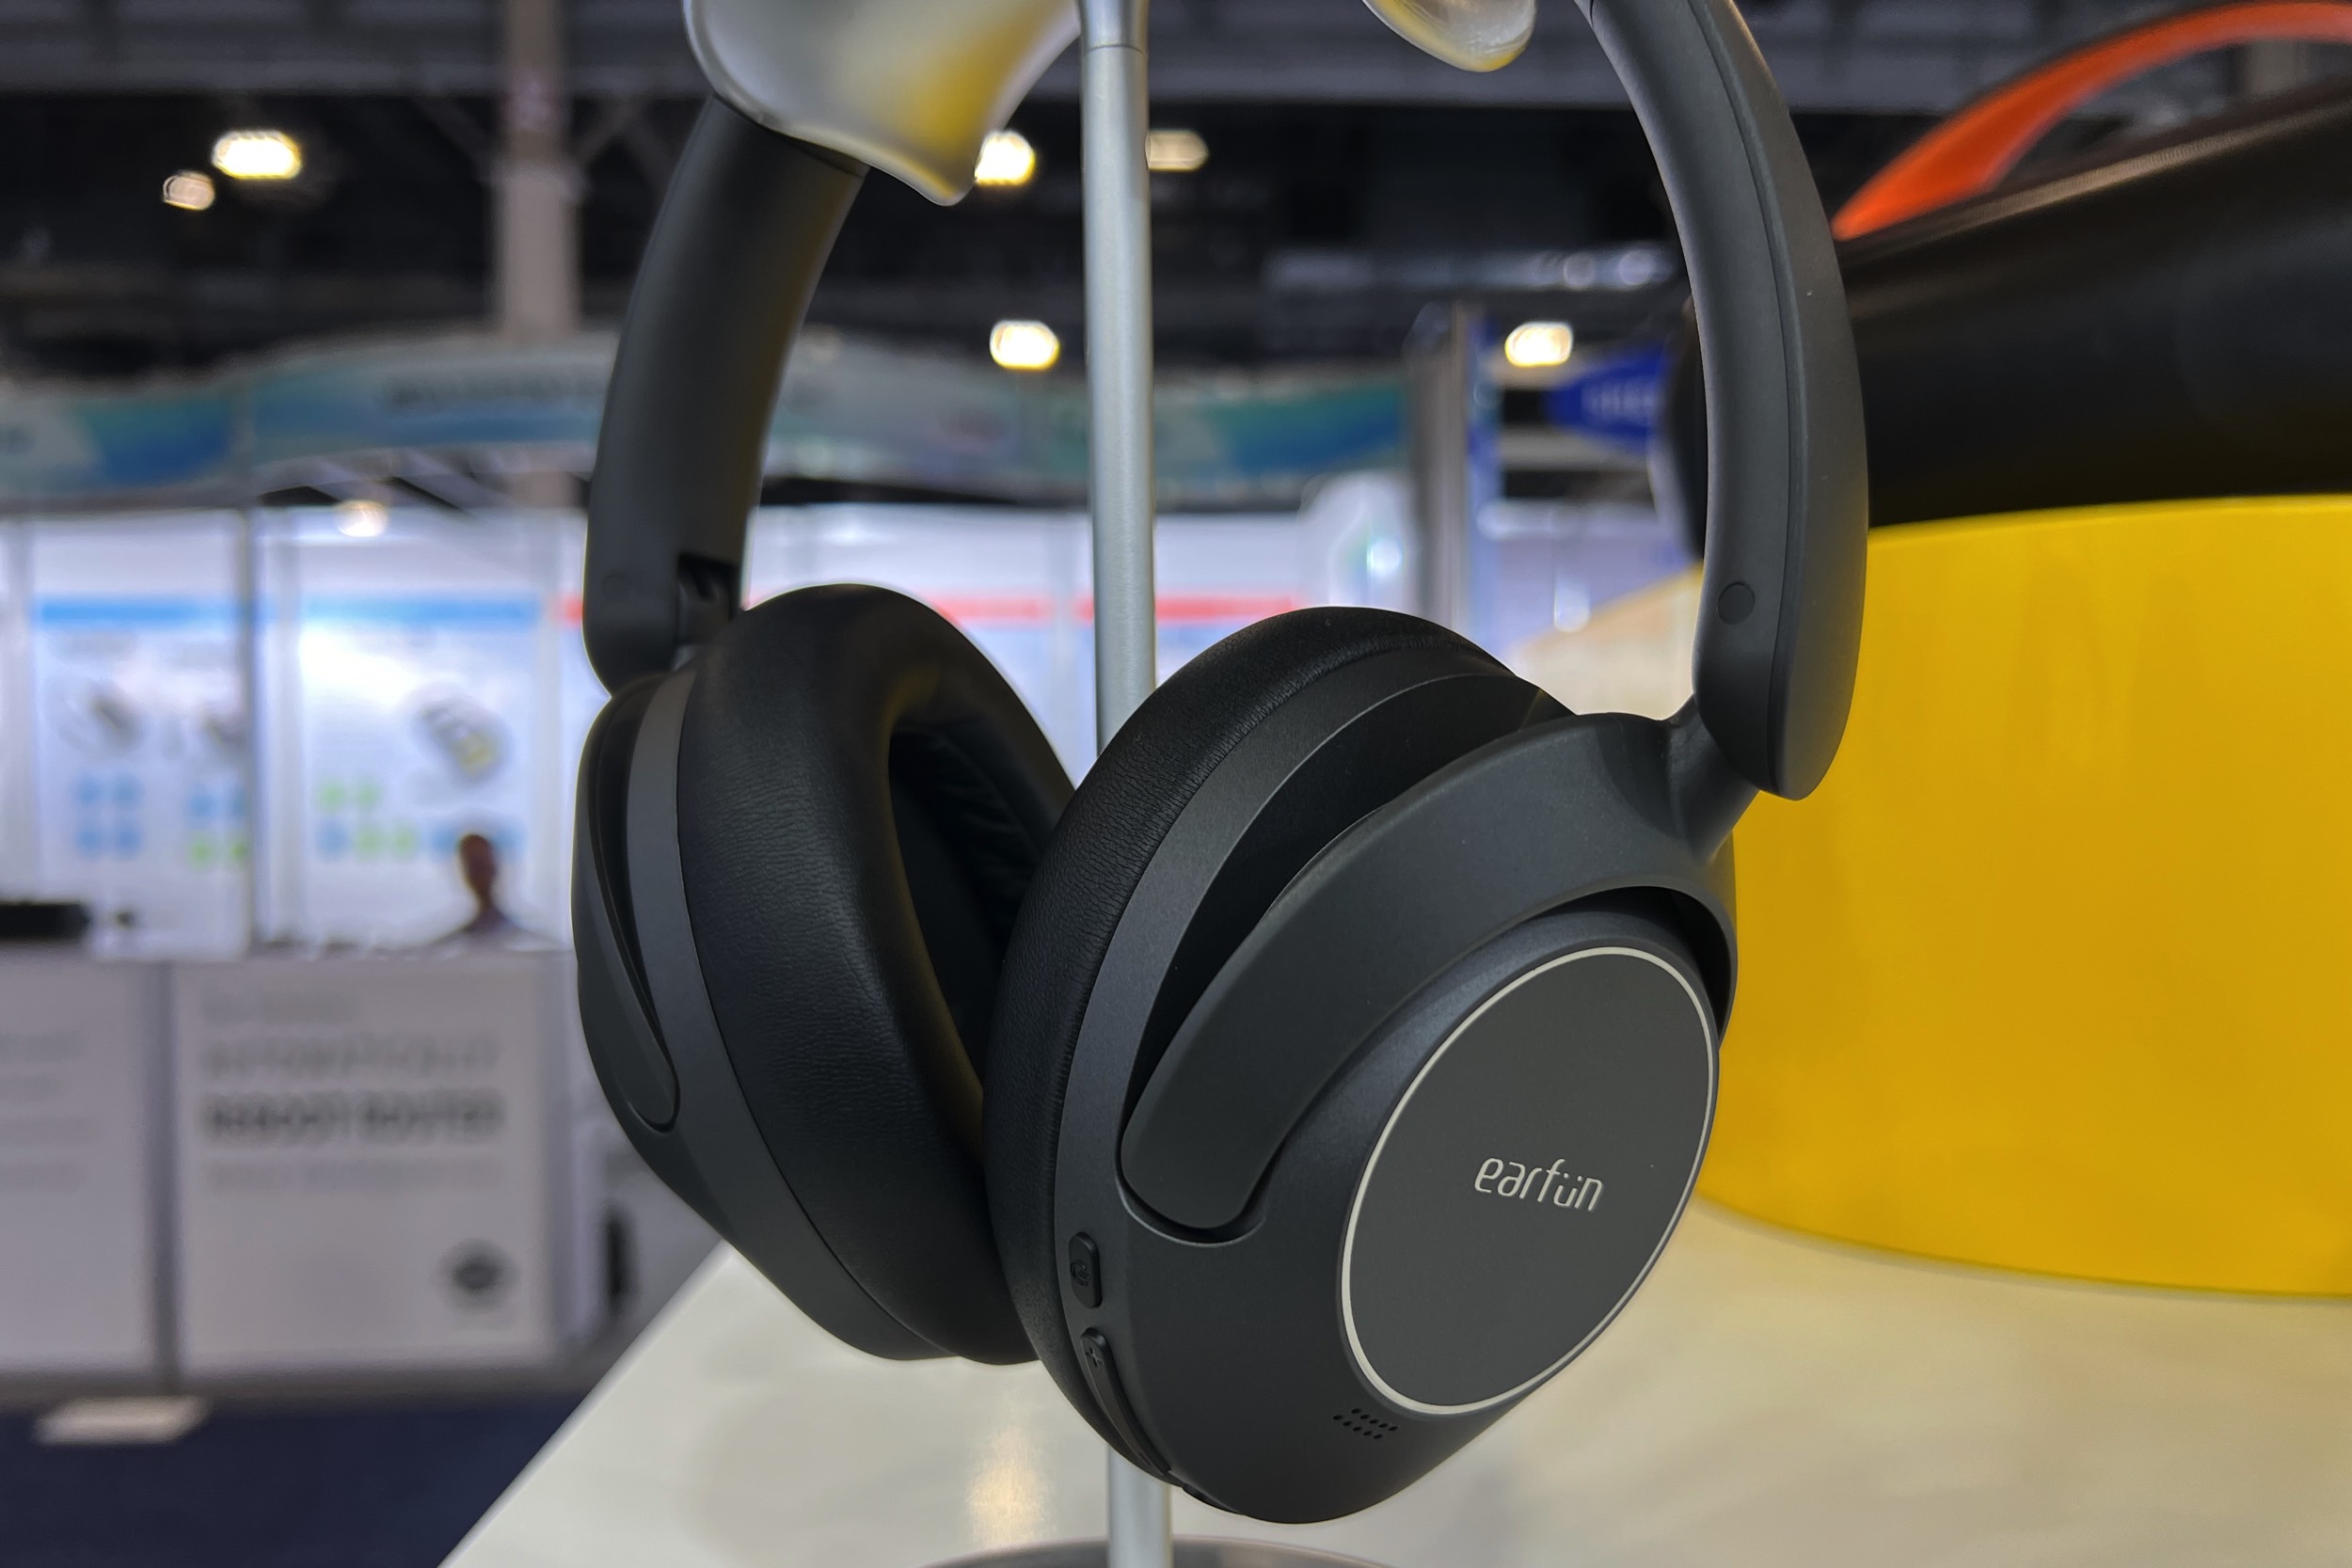 We go ears-on with EarFun's first wireless headphones at CES